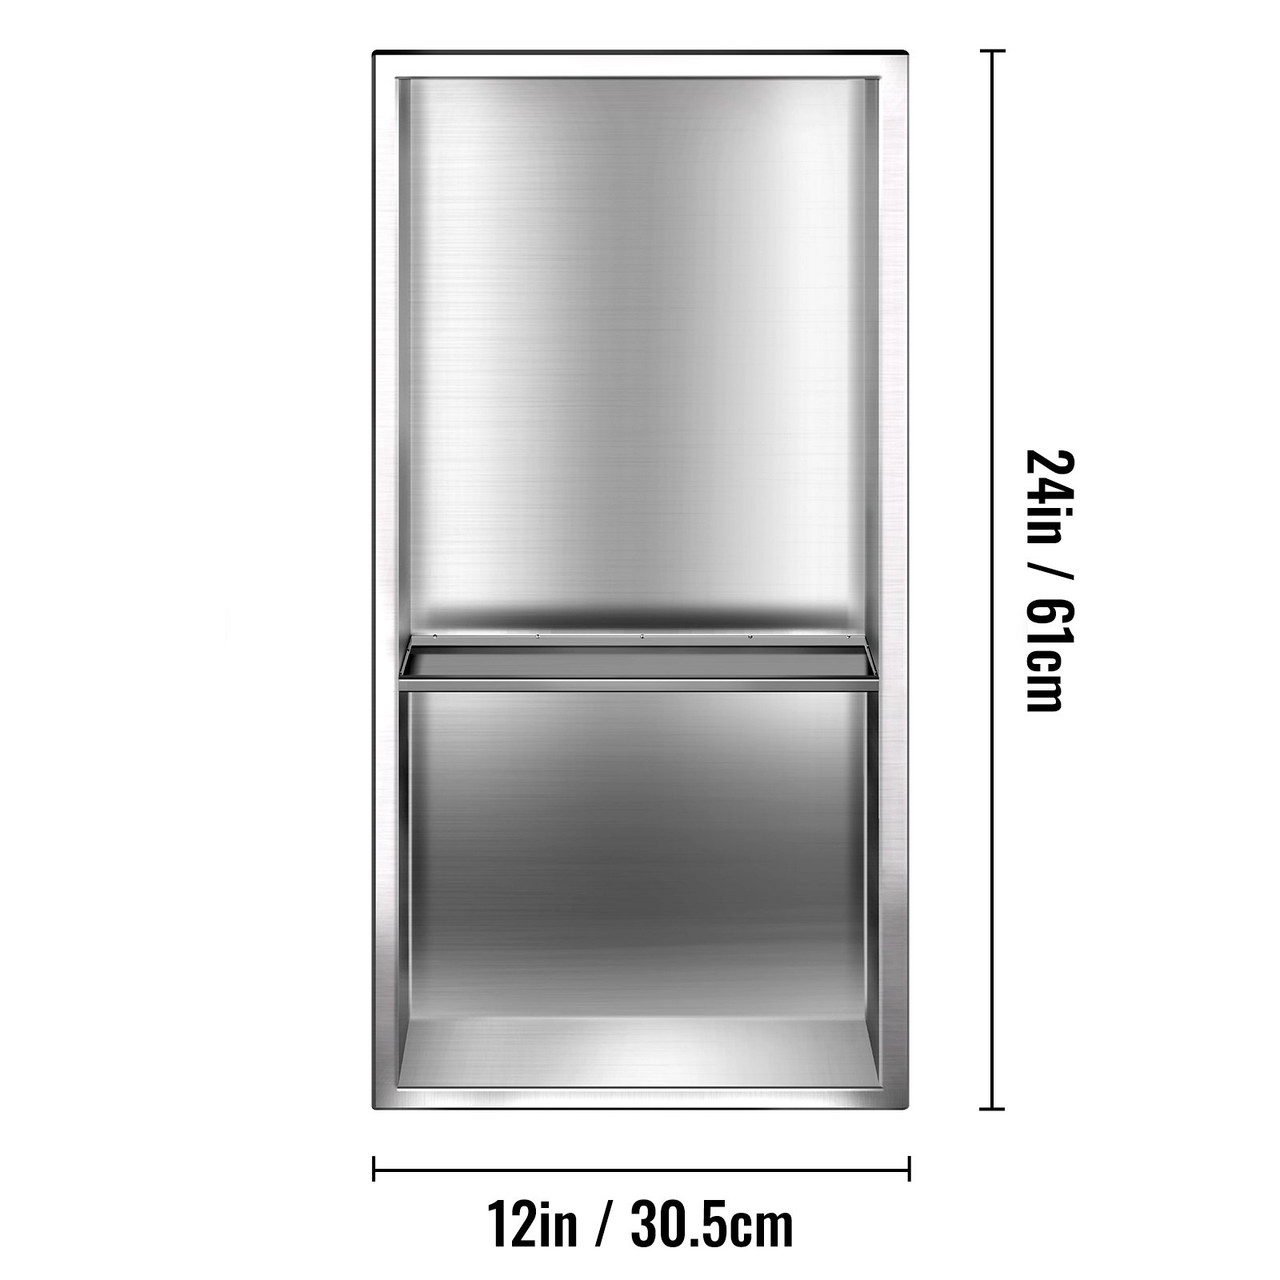 Shower Niche Stainless Steel, 12'' x 24'' x 4'', Wall-inserted Niche Recessed, Easy to Install, Recessed Shower Shelf Modern and Elegant, Soap Niche Polished Finish for Shower/Bathroom